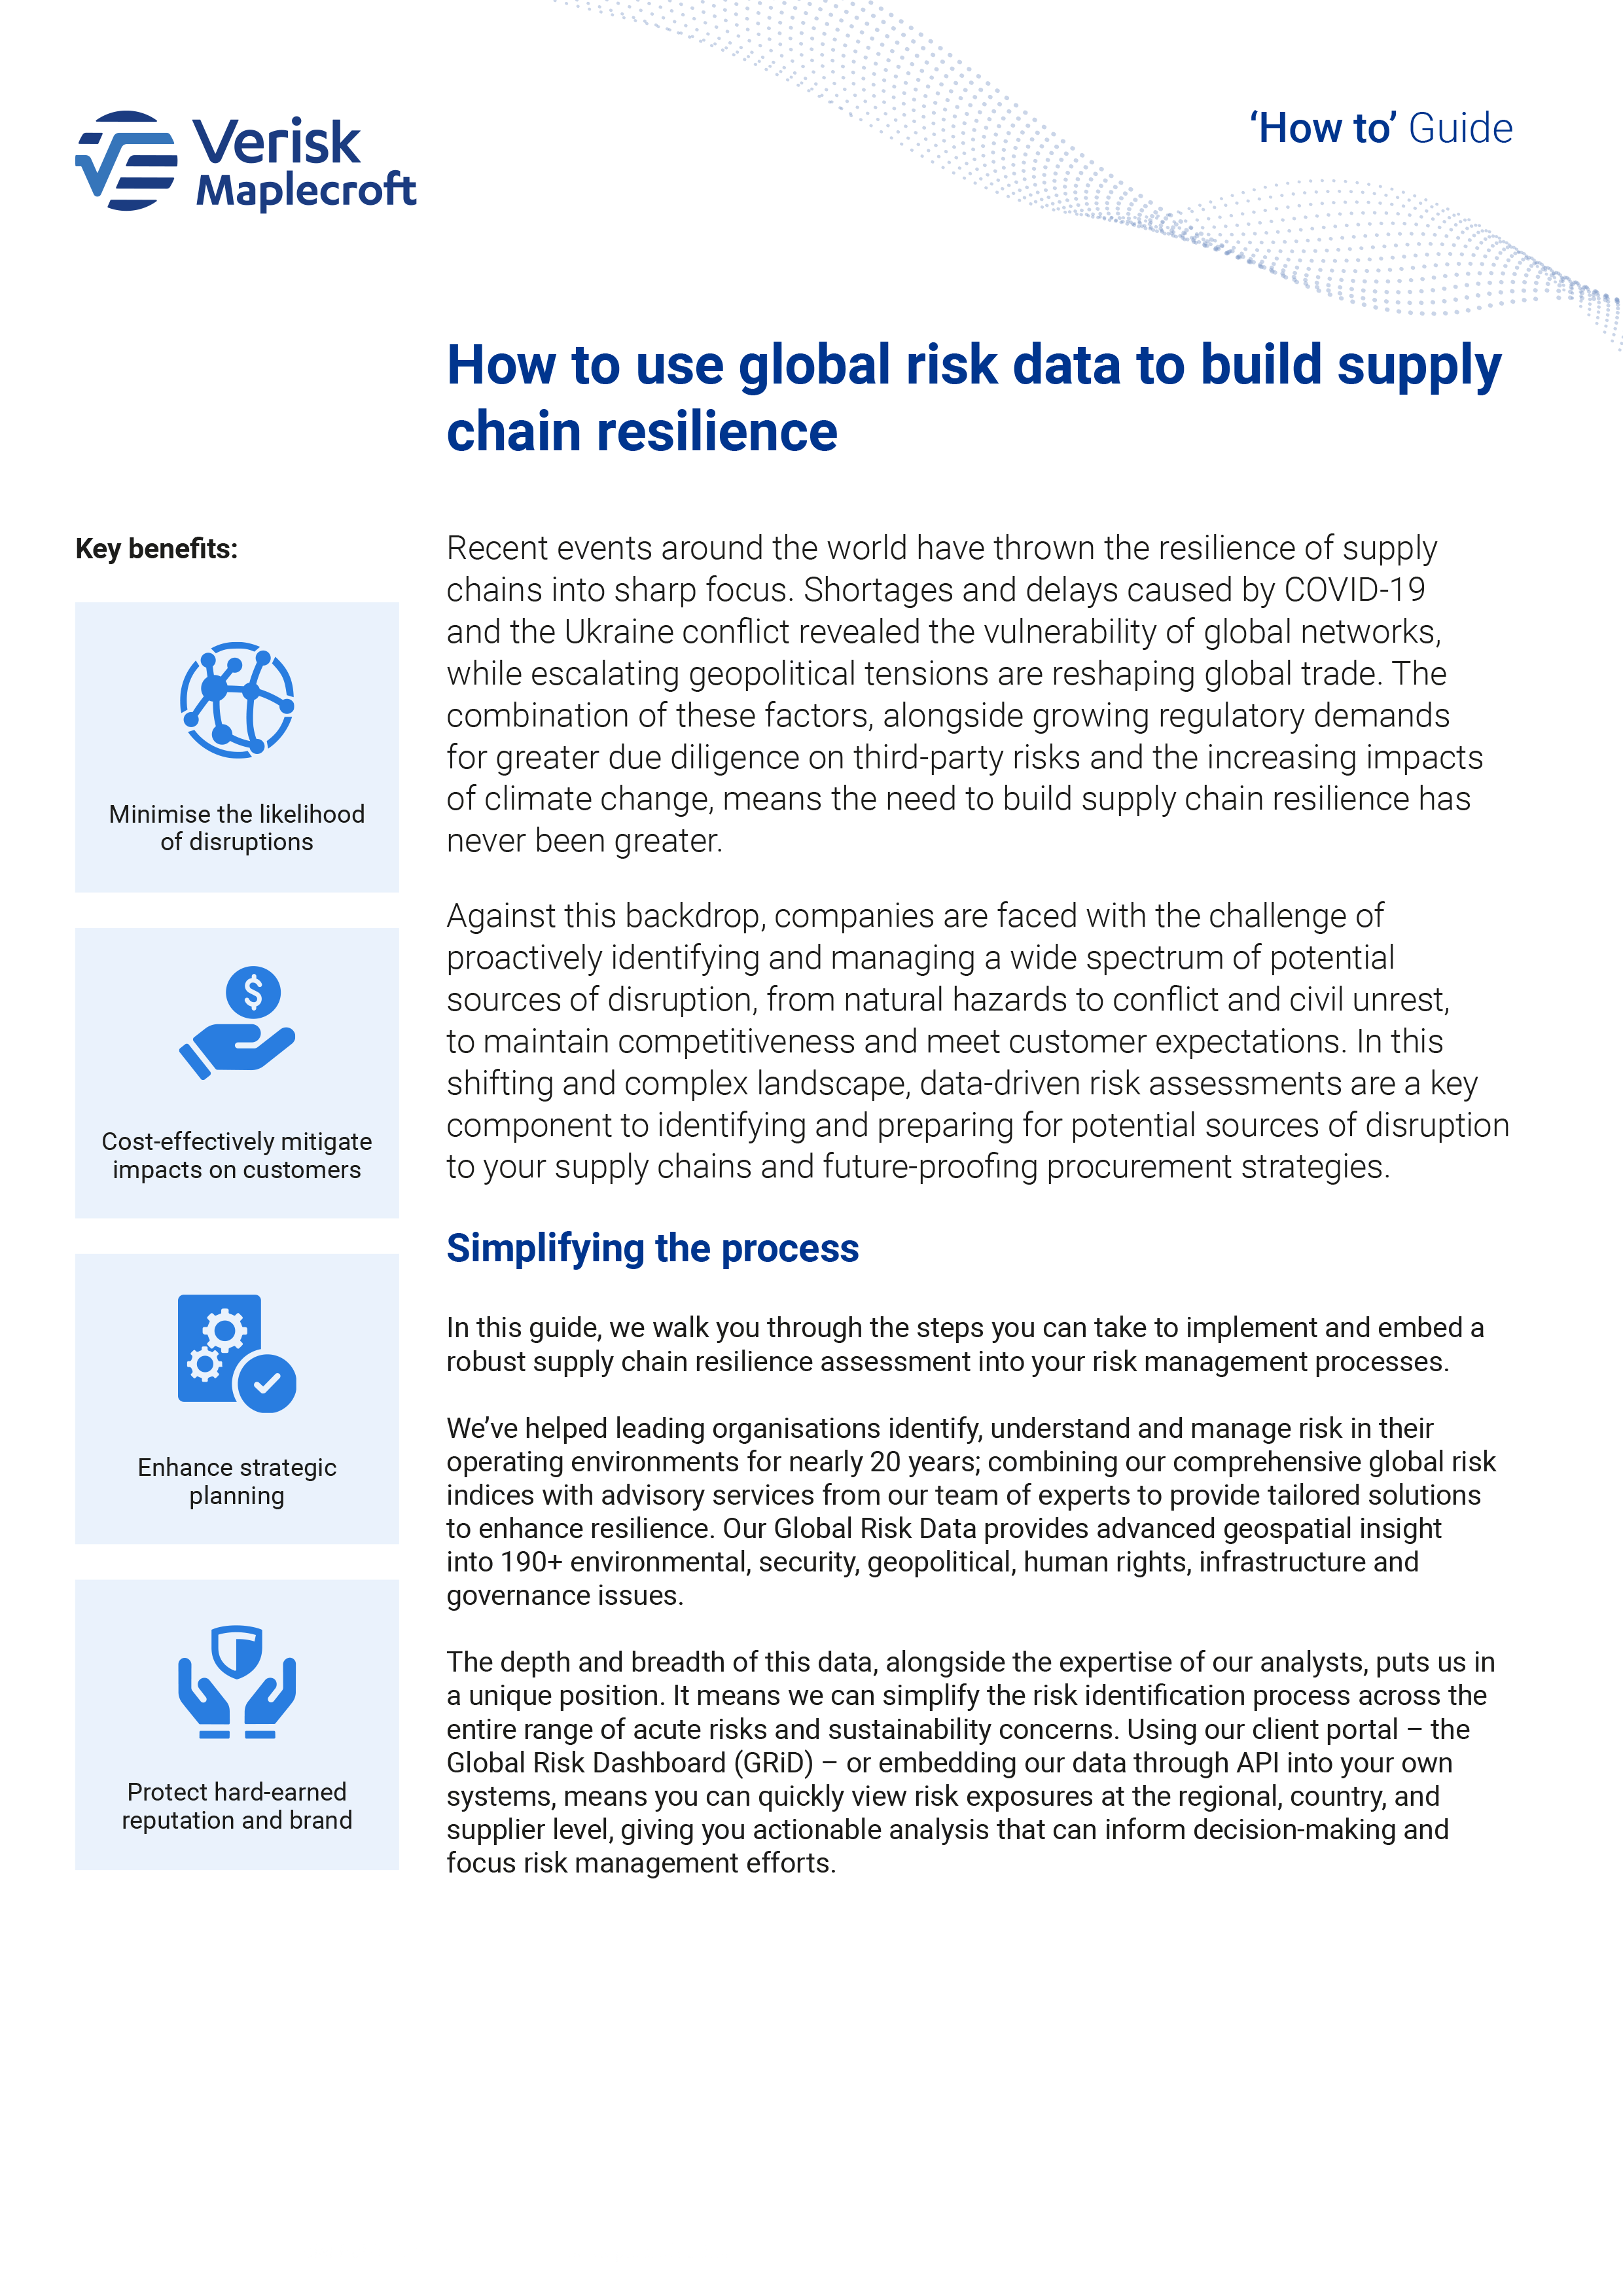 Guide - How to use Global Risk Data to build supply chain resilience